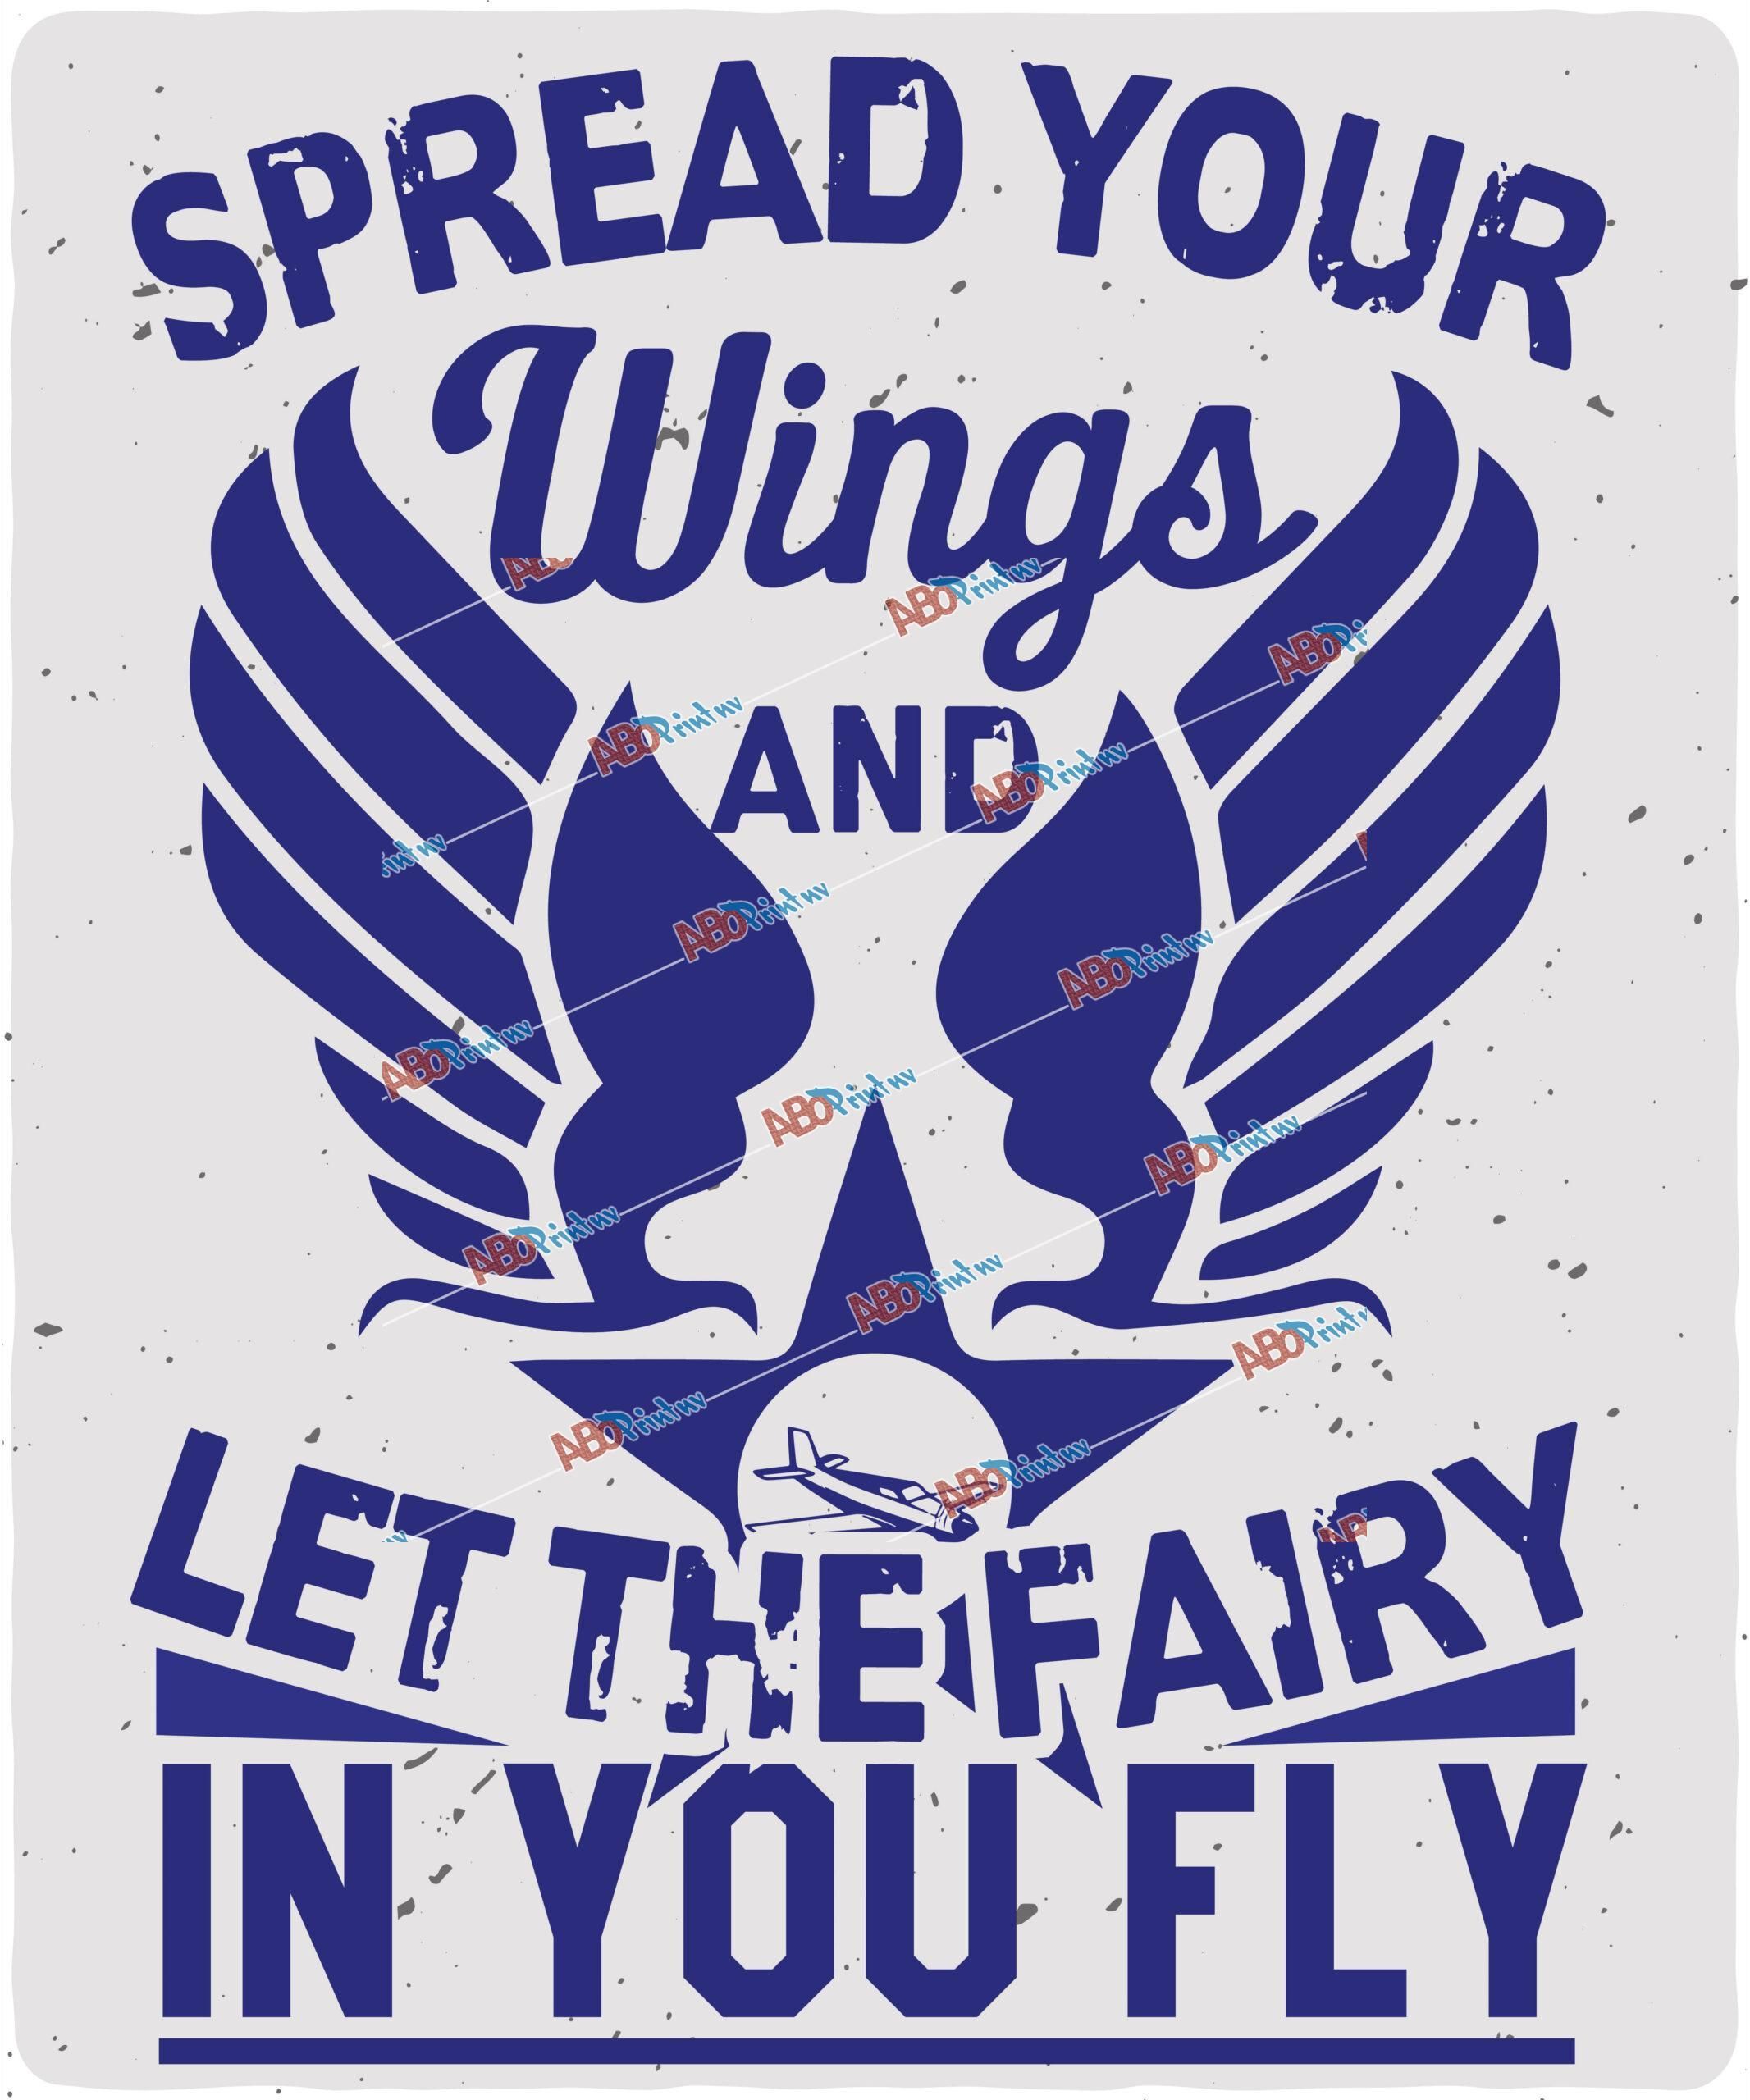 Spread your wings and let the fairy